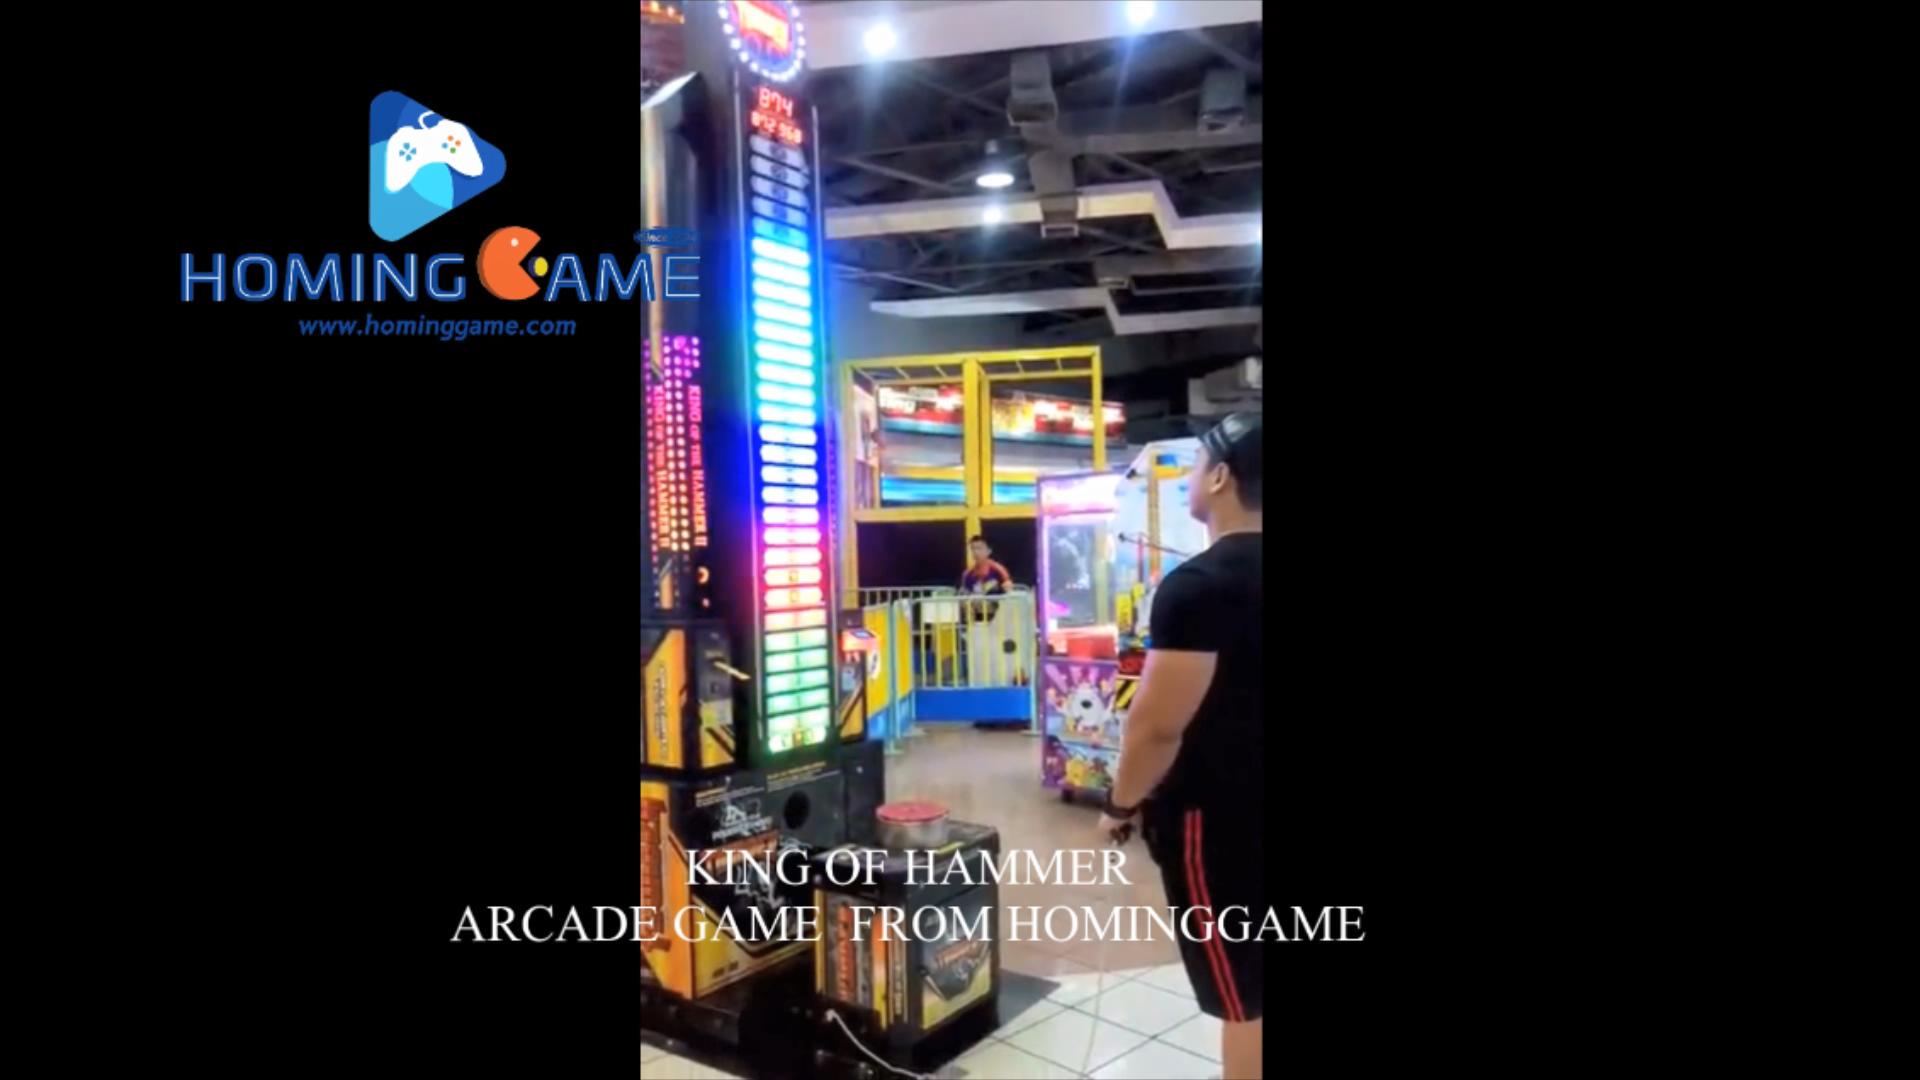 2021 People Like Playing HomingGame Best Coin Operated King Of Hammer Arcade Game Machine(Order Call Whatsapp:+8618688409495),king of hammer arcade game machine,king of hammer,mr hammer 2 arcade game machine,mr hammer 2 boxing arcade game machine,mr hammer 2 amusement boxing arcade game machine,mr hammer 2 king of hammer arcade game machine,king of hammer arcade game mahcine,king of hammer,hammer arcade game,hammer boxing arcade game machine,hammer boxing game machine,coin operated mr hammer 2 boxing arcade game machine,coin operated king of hammer arcade game machine,game machine,arcade game machine,coin operated game machine,amusement park game equipment,amusement machine,entertainment game,family entertainment game machine,entertainment machine,indoor game machine,lottery game machine,redemption game machine,redemption game,arcade games,arcade game machine for sale,hominggame,www.gametube.hk,hammer machine,kids game equipment,kids lottery game machine,FEC game center game machine,FEC game,electrical kids game machine,children game machine,redemption ticket game machine